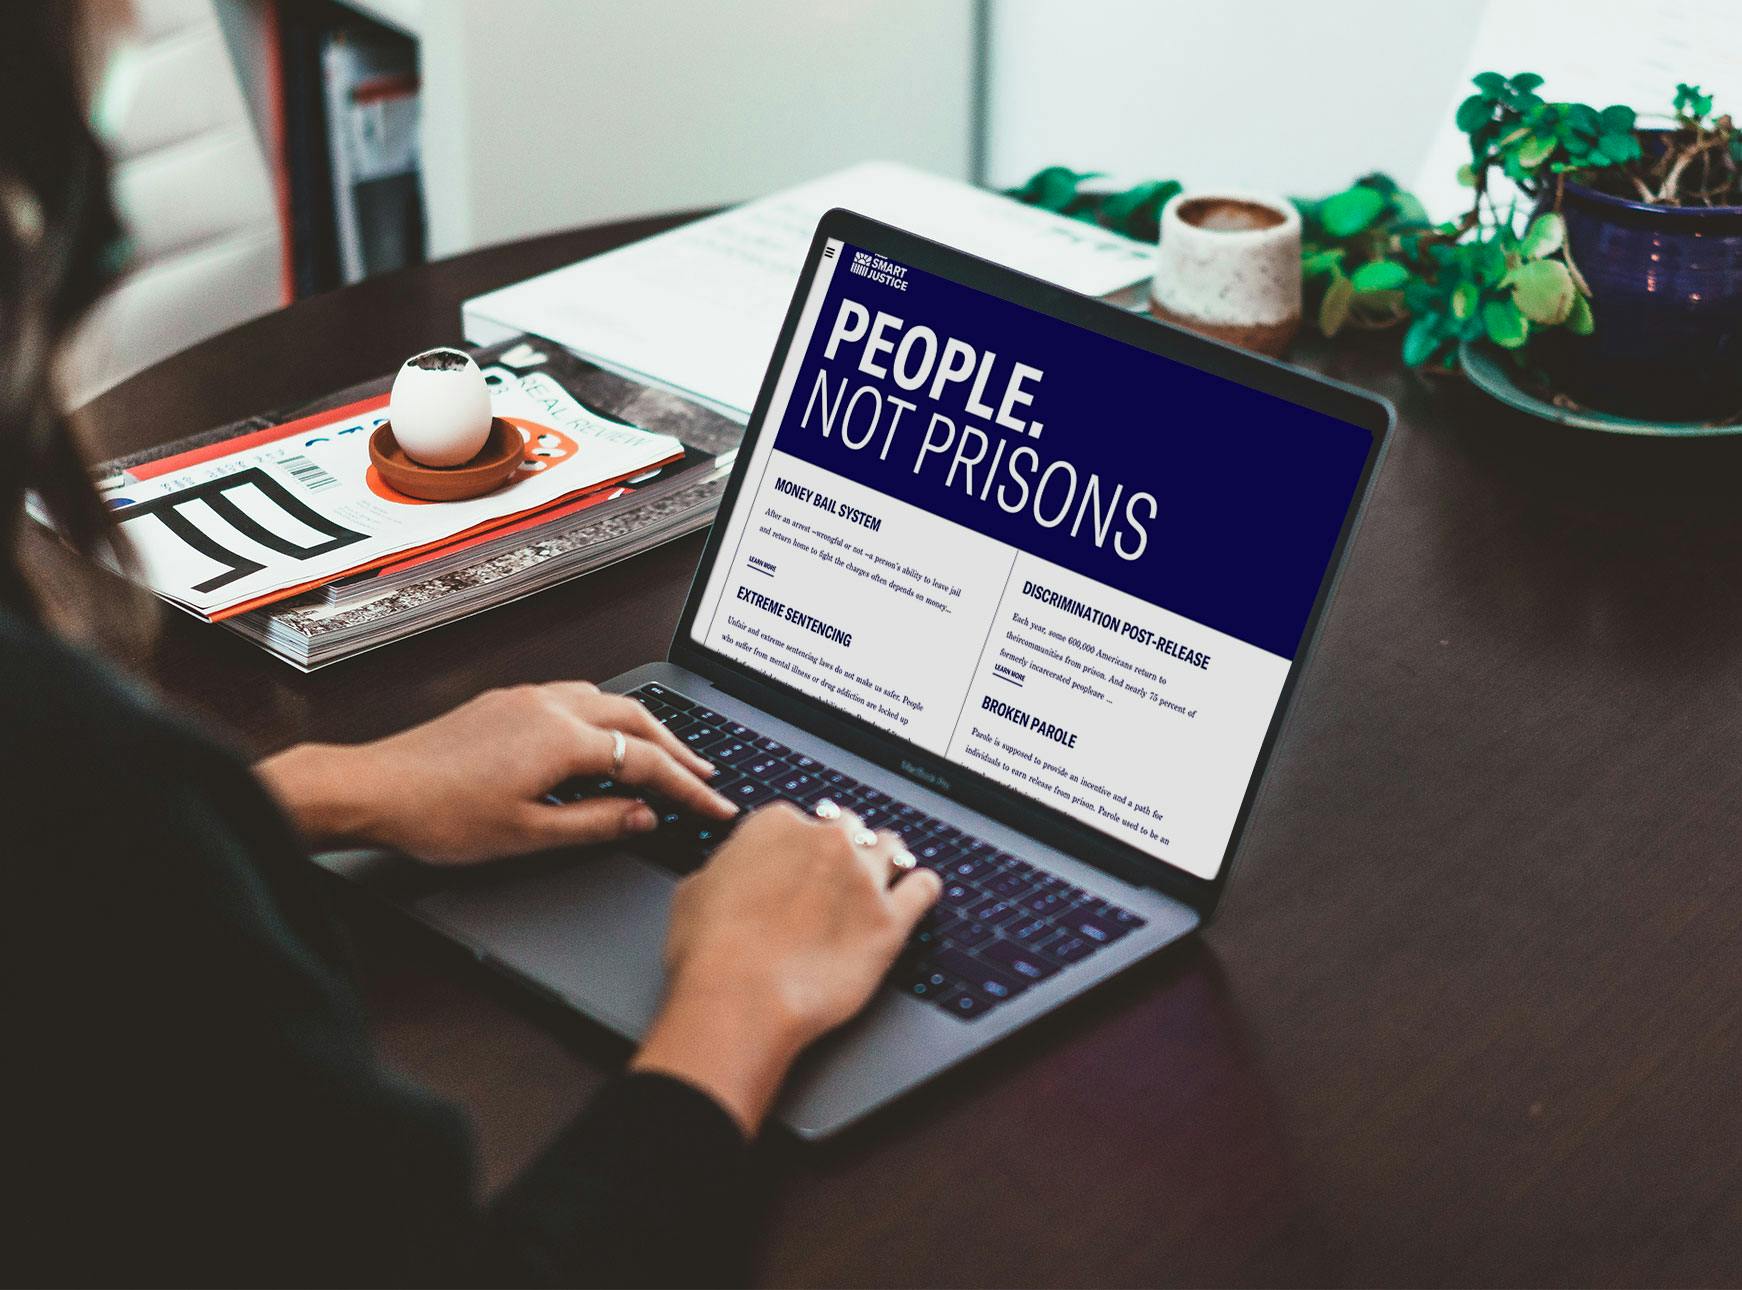 People not prisons on a laptop